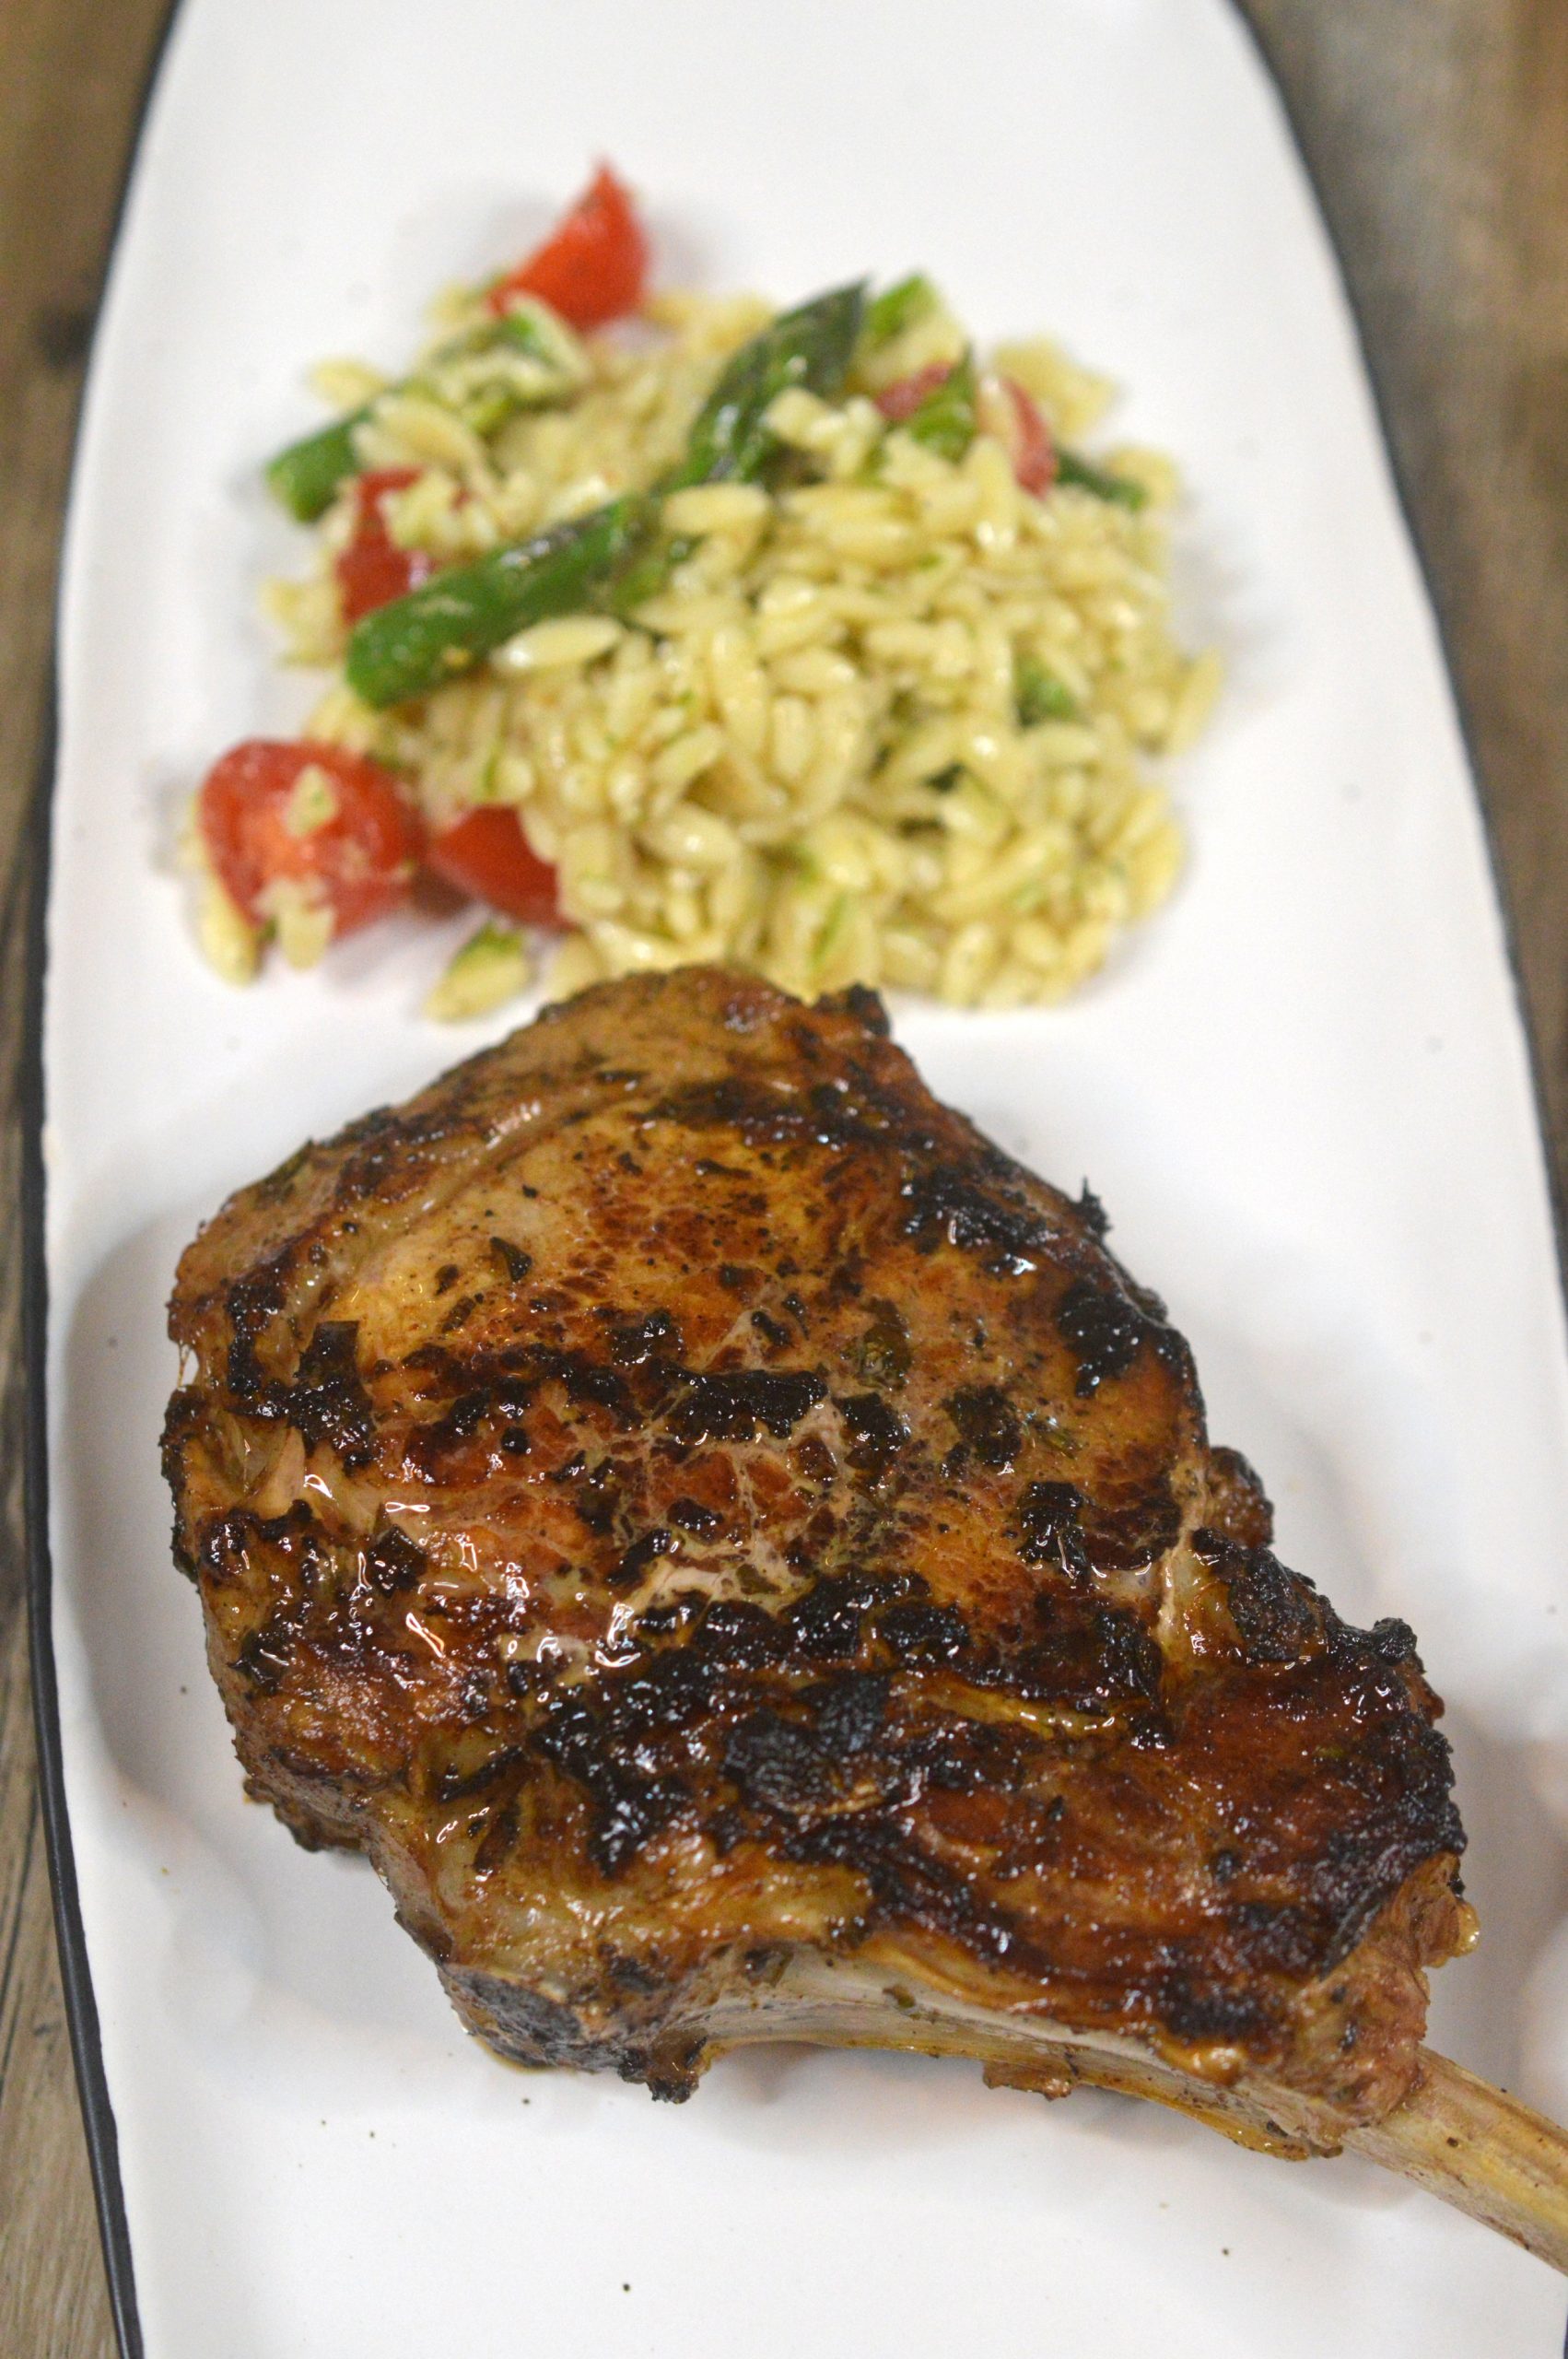 Grilled veal chops with a rice pilaf side